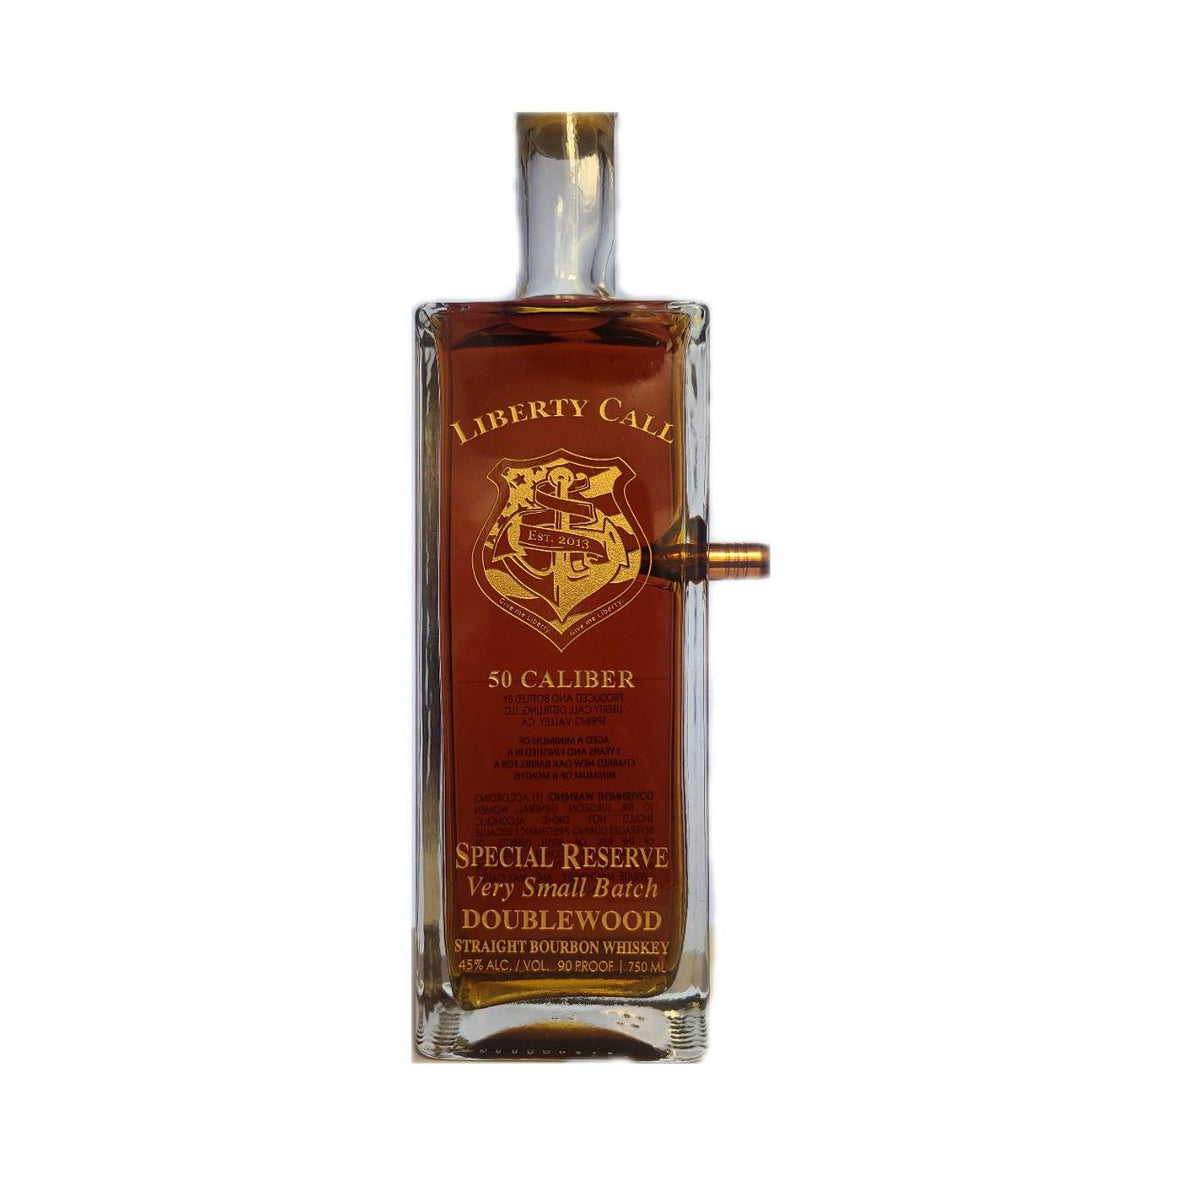 Liberty Call Distilling Co. 50 Caliber Special Reserve Very Small Batch Doublewood Straight Bourbon Whiskey